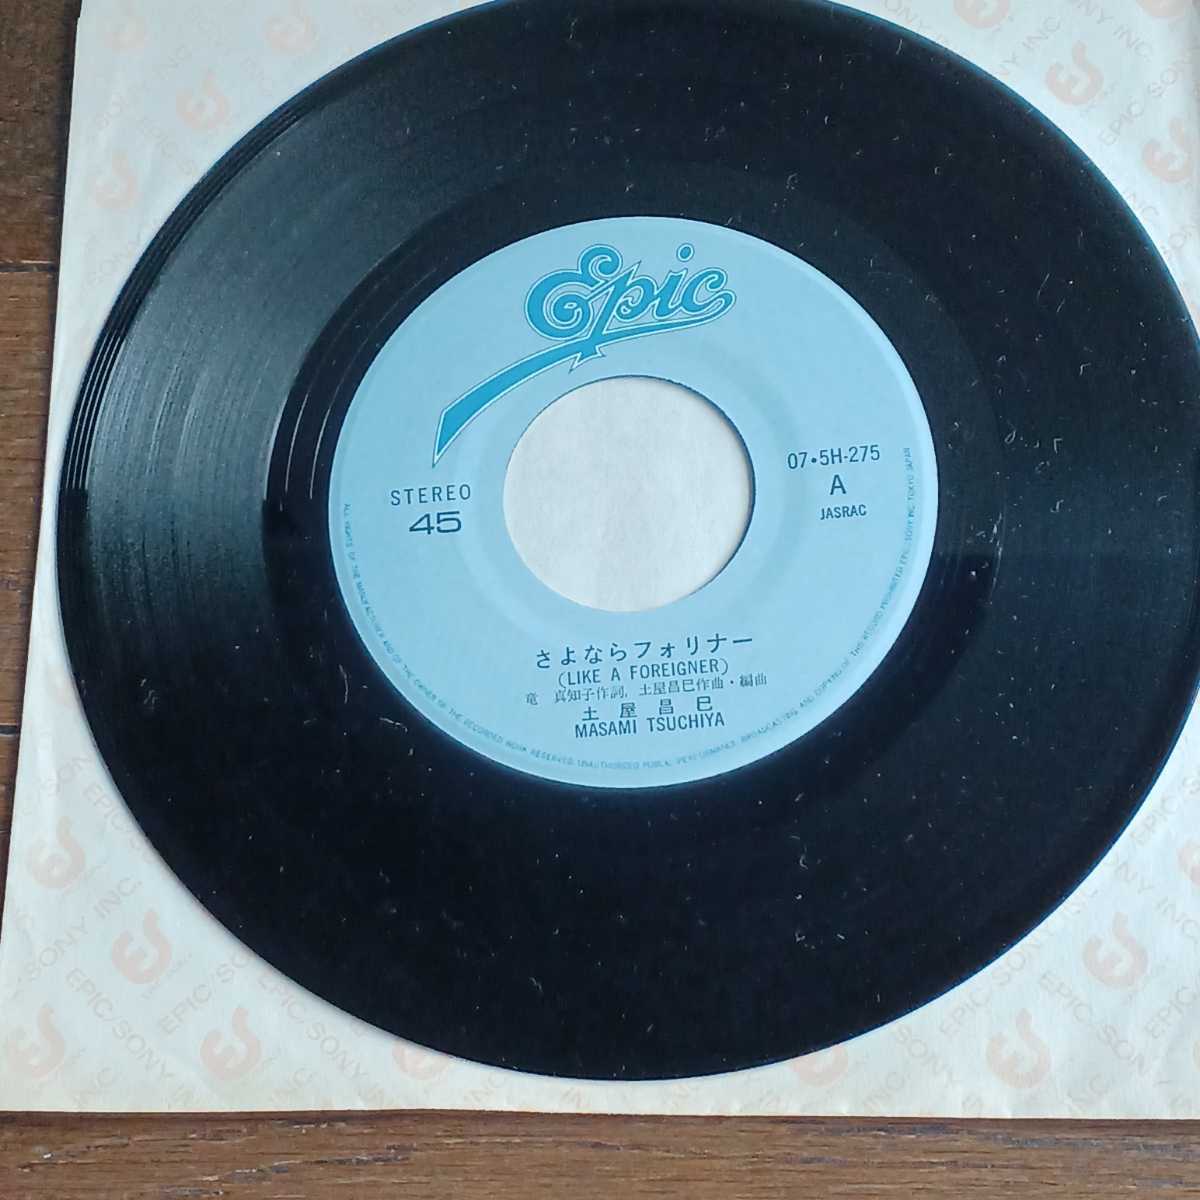  domestic record 7inch Single* earth shop ..( one manner .) *<.. if folina-(Like A Foreigner)/ Alien>Japan/ Arcadia